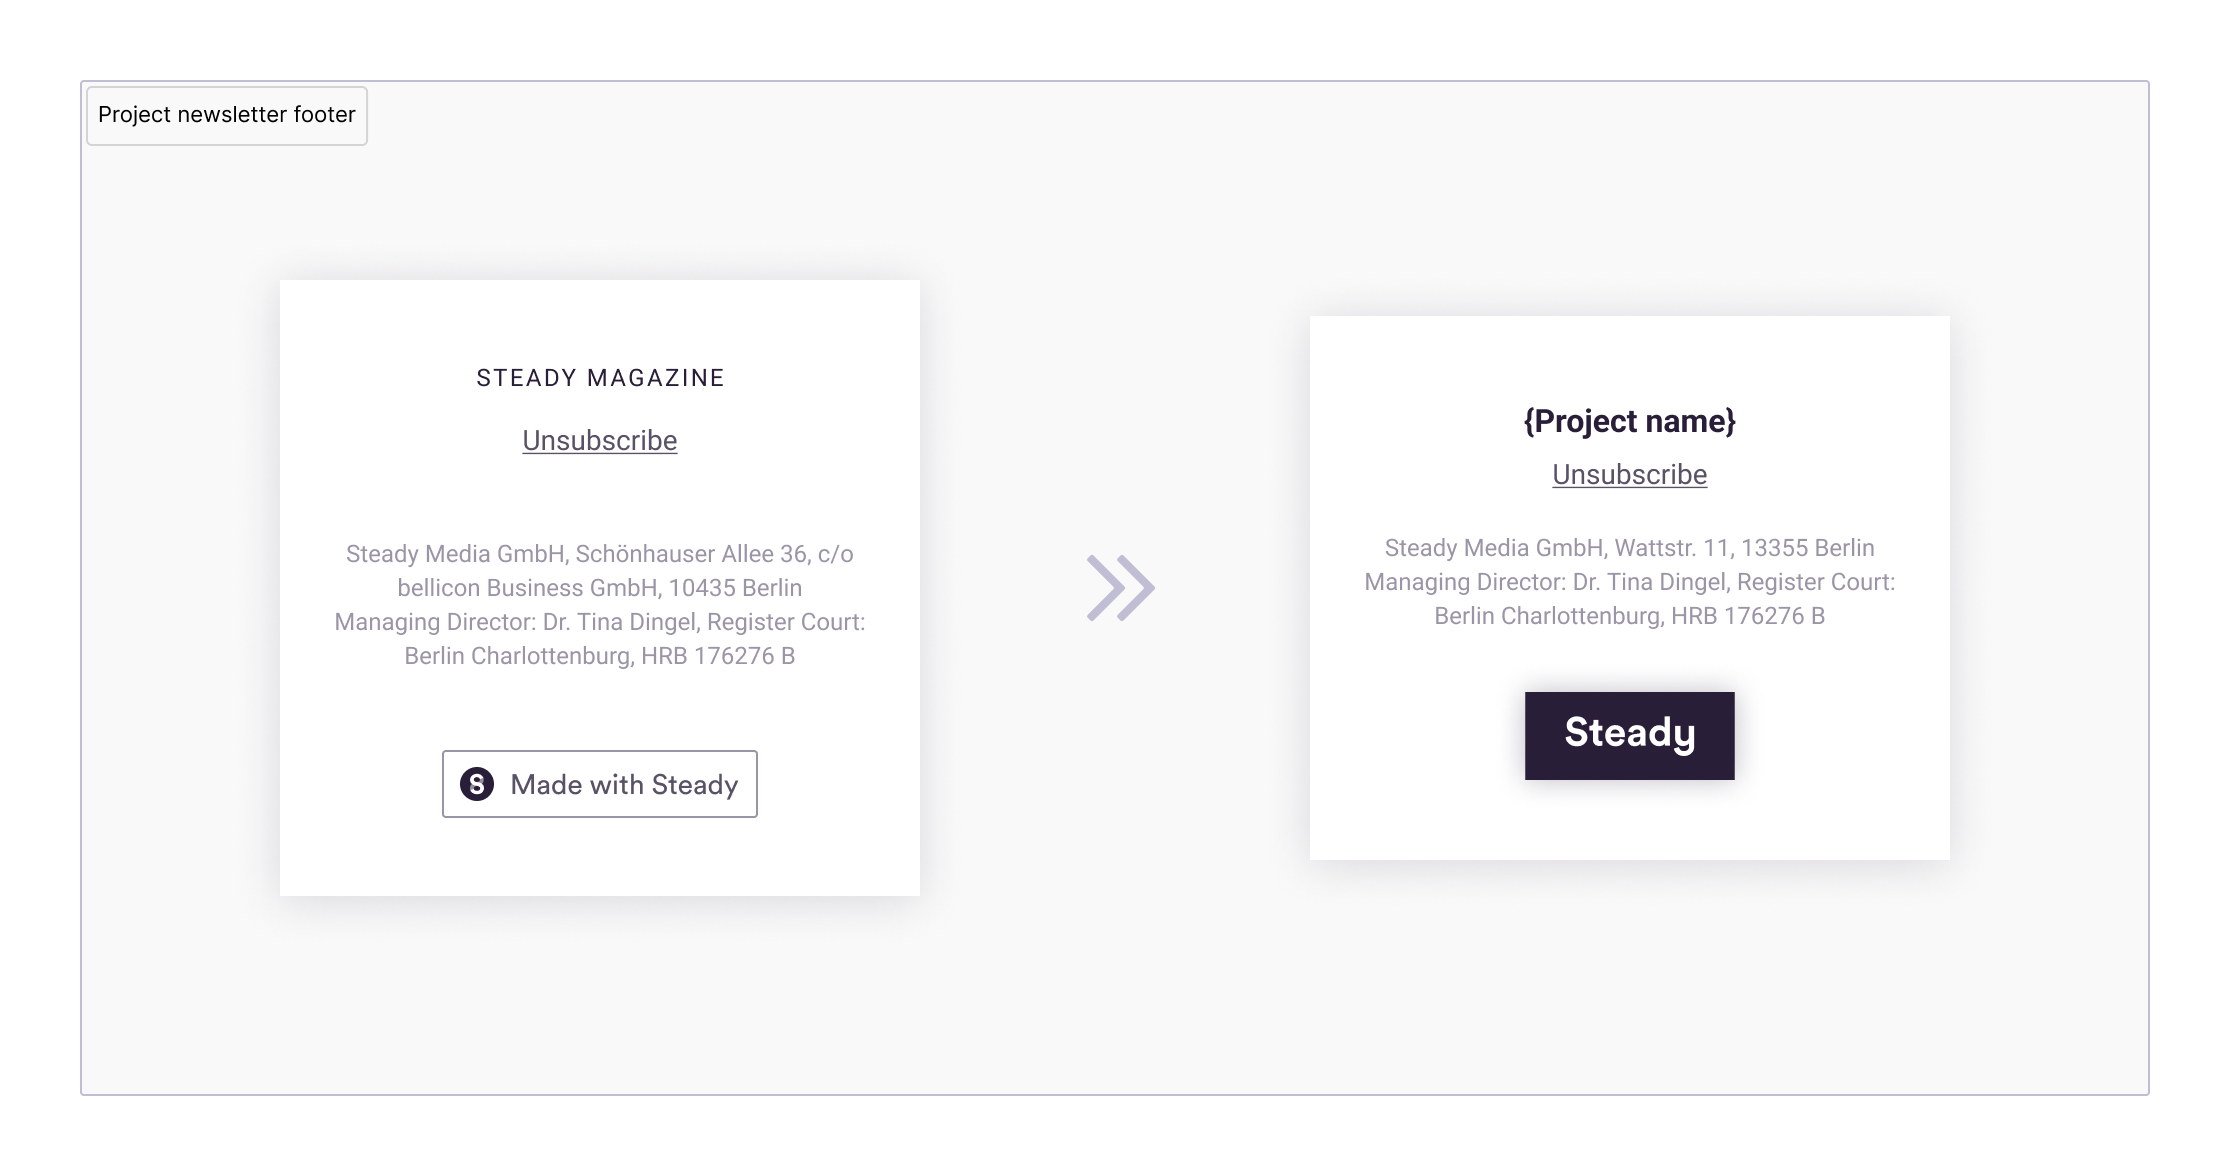 Project newsletter footer